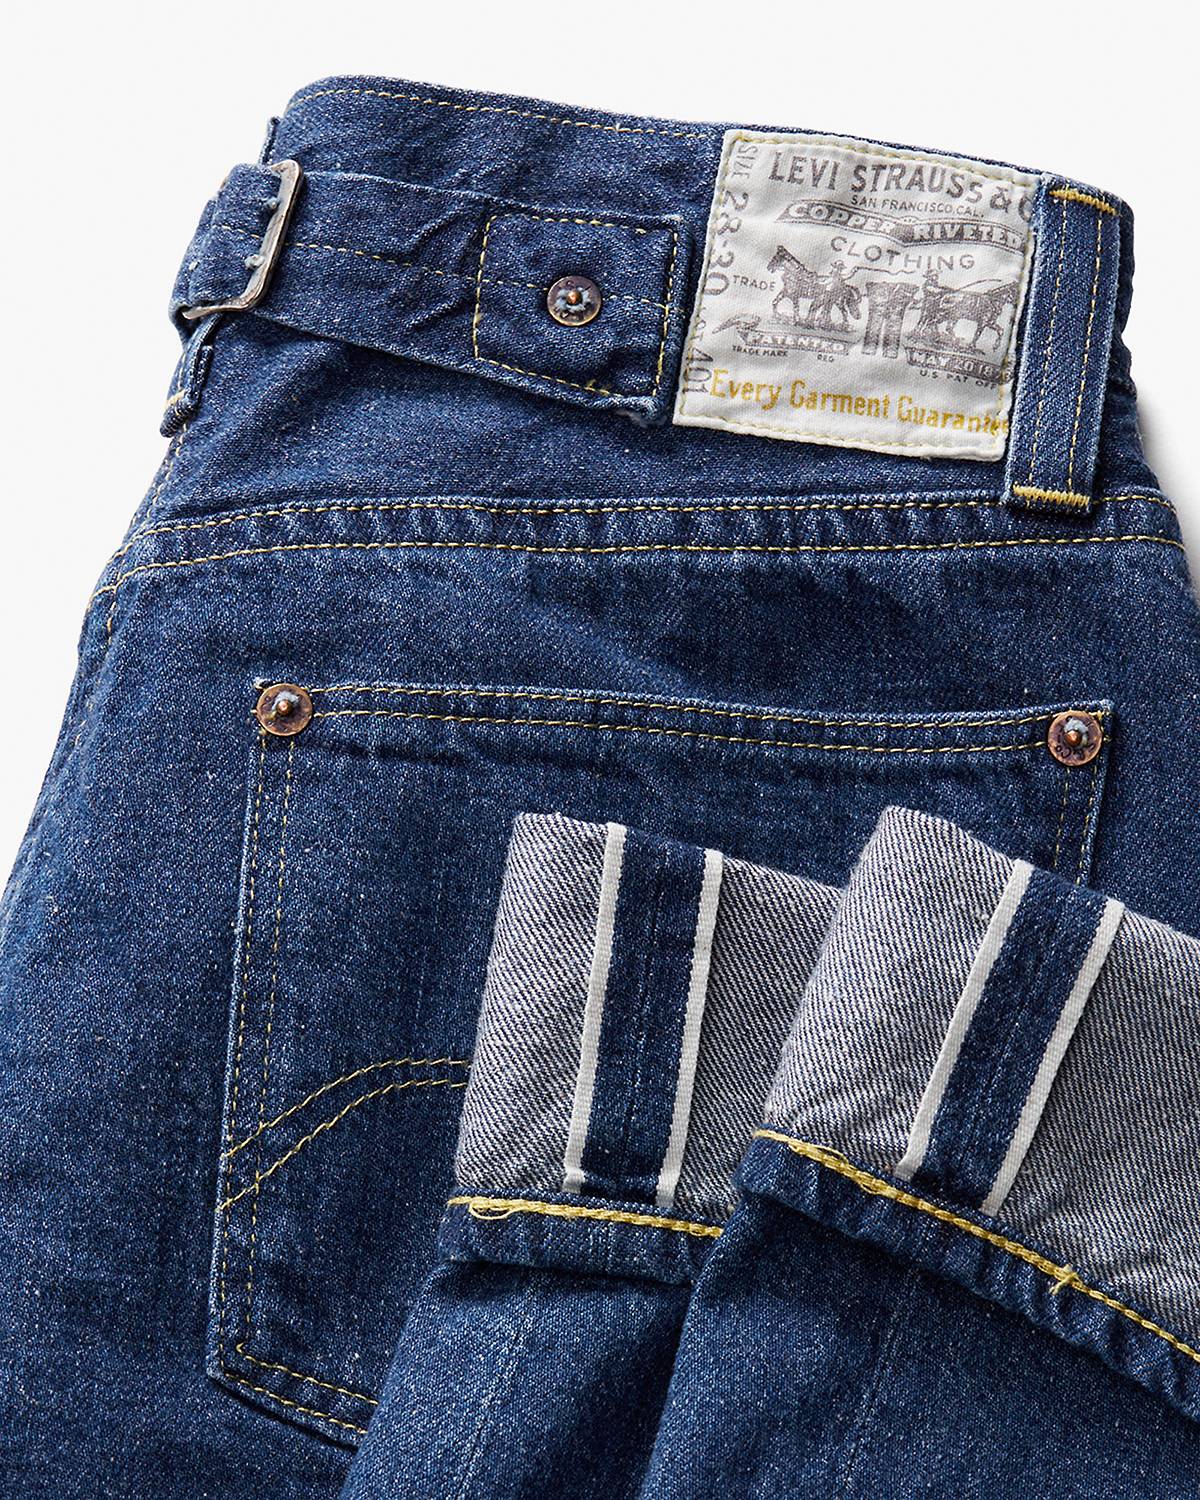 Levi's Drops Second Collection with Denim Tears